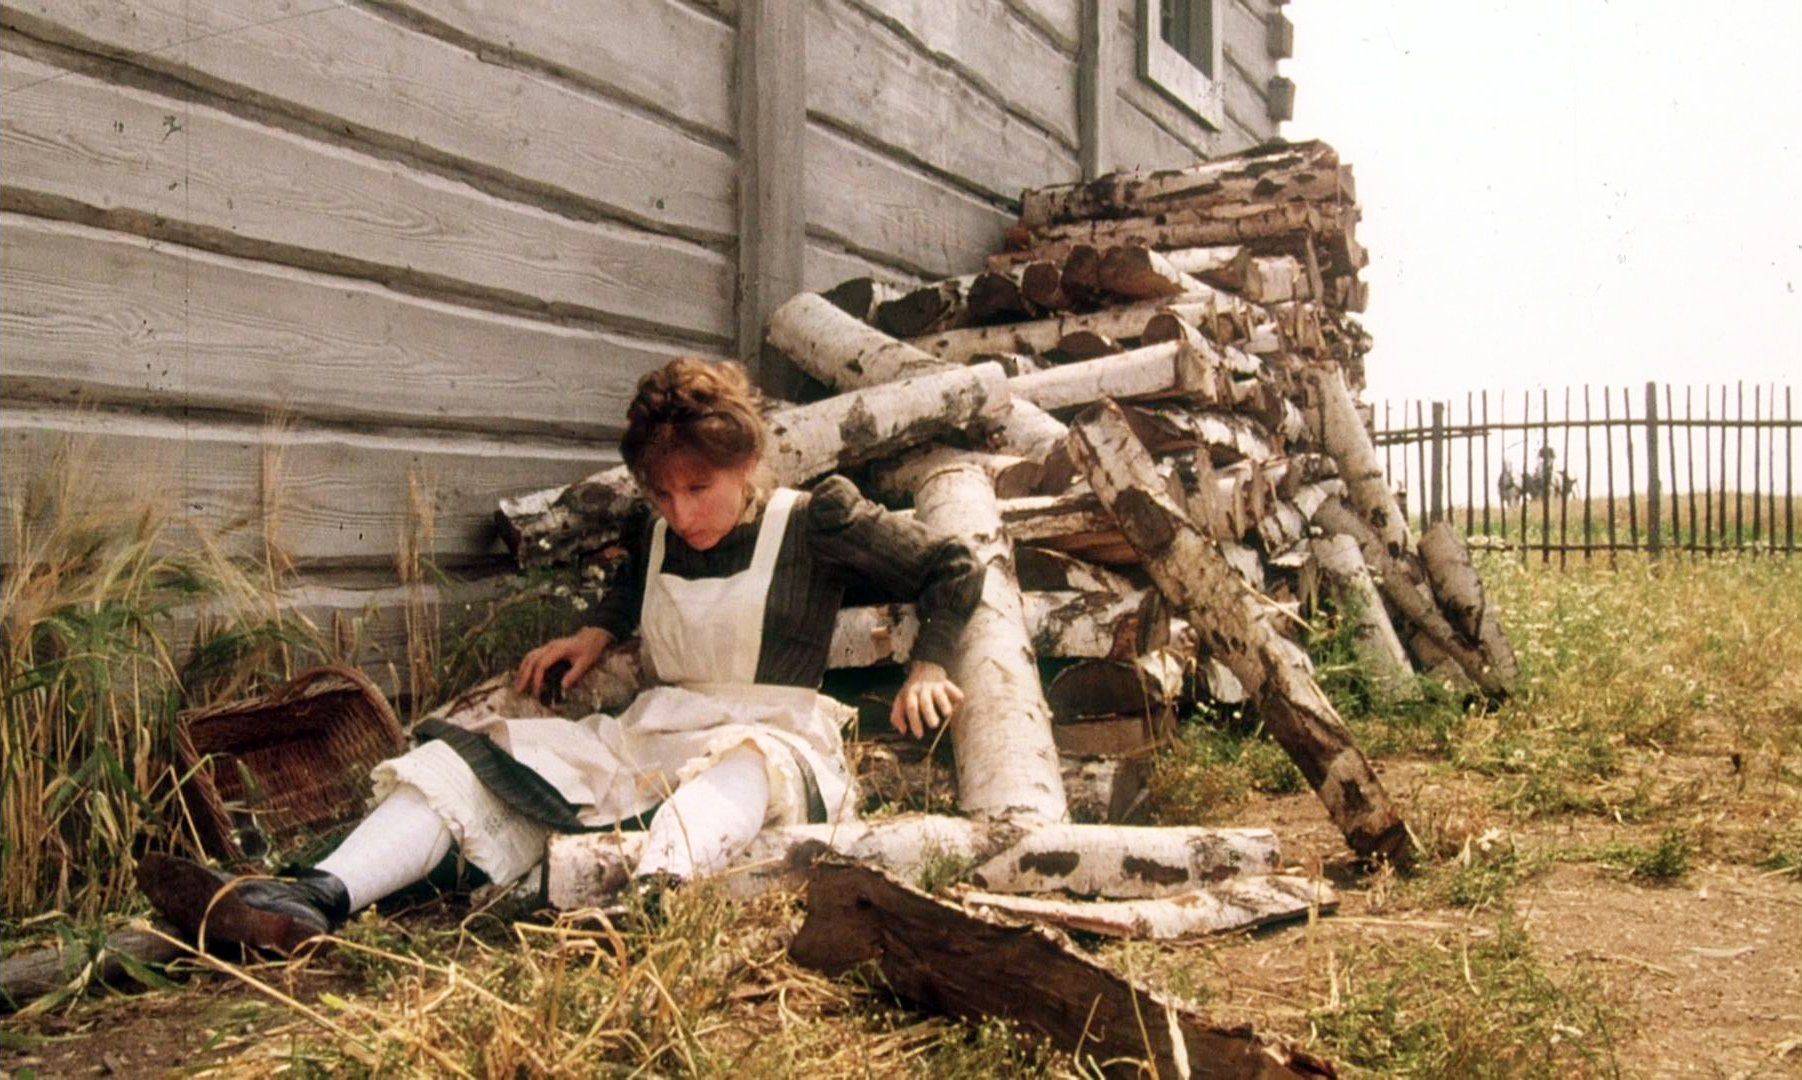 A cut scene in which Yentl falls off a stack of wood while peering into the Jewish Temple.